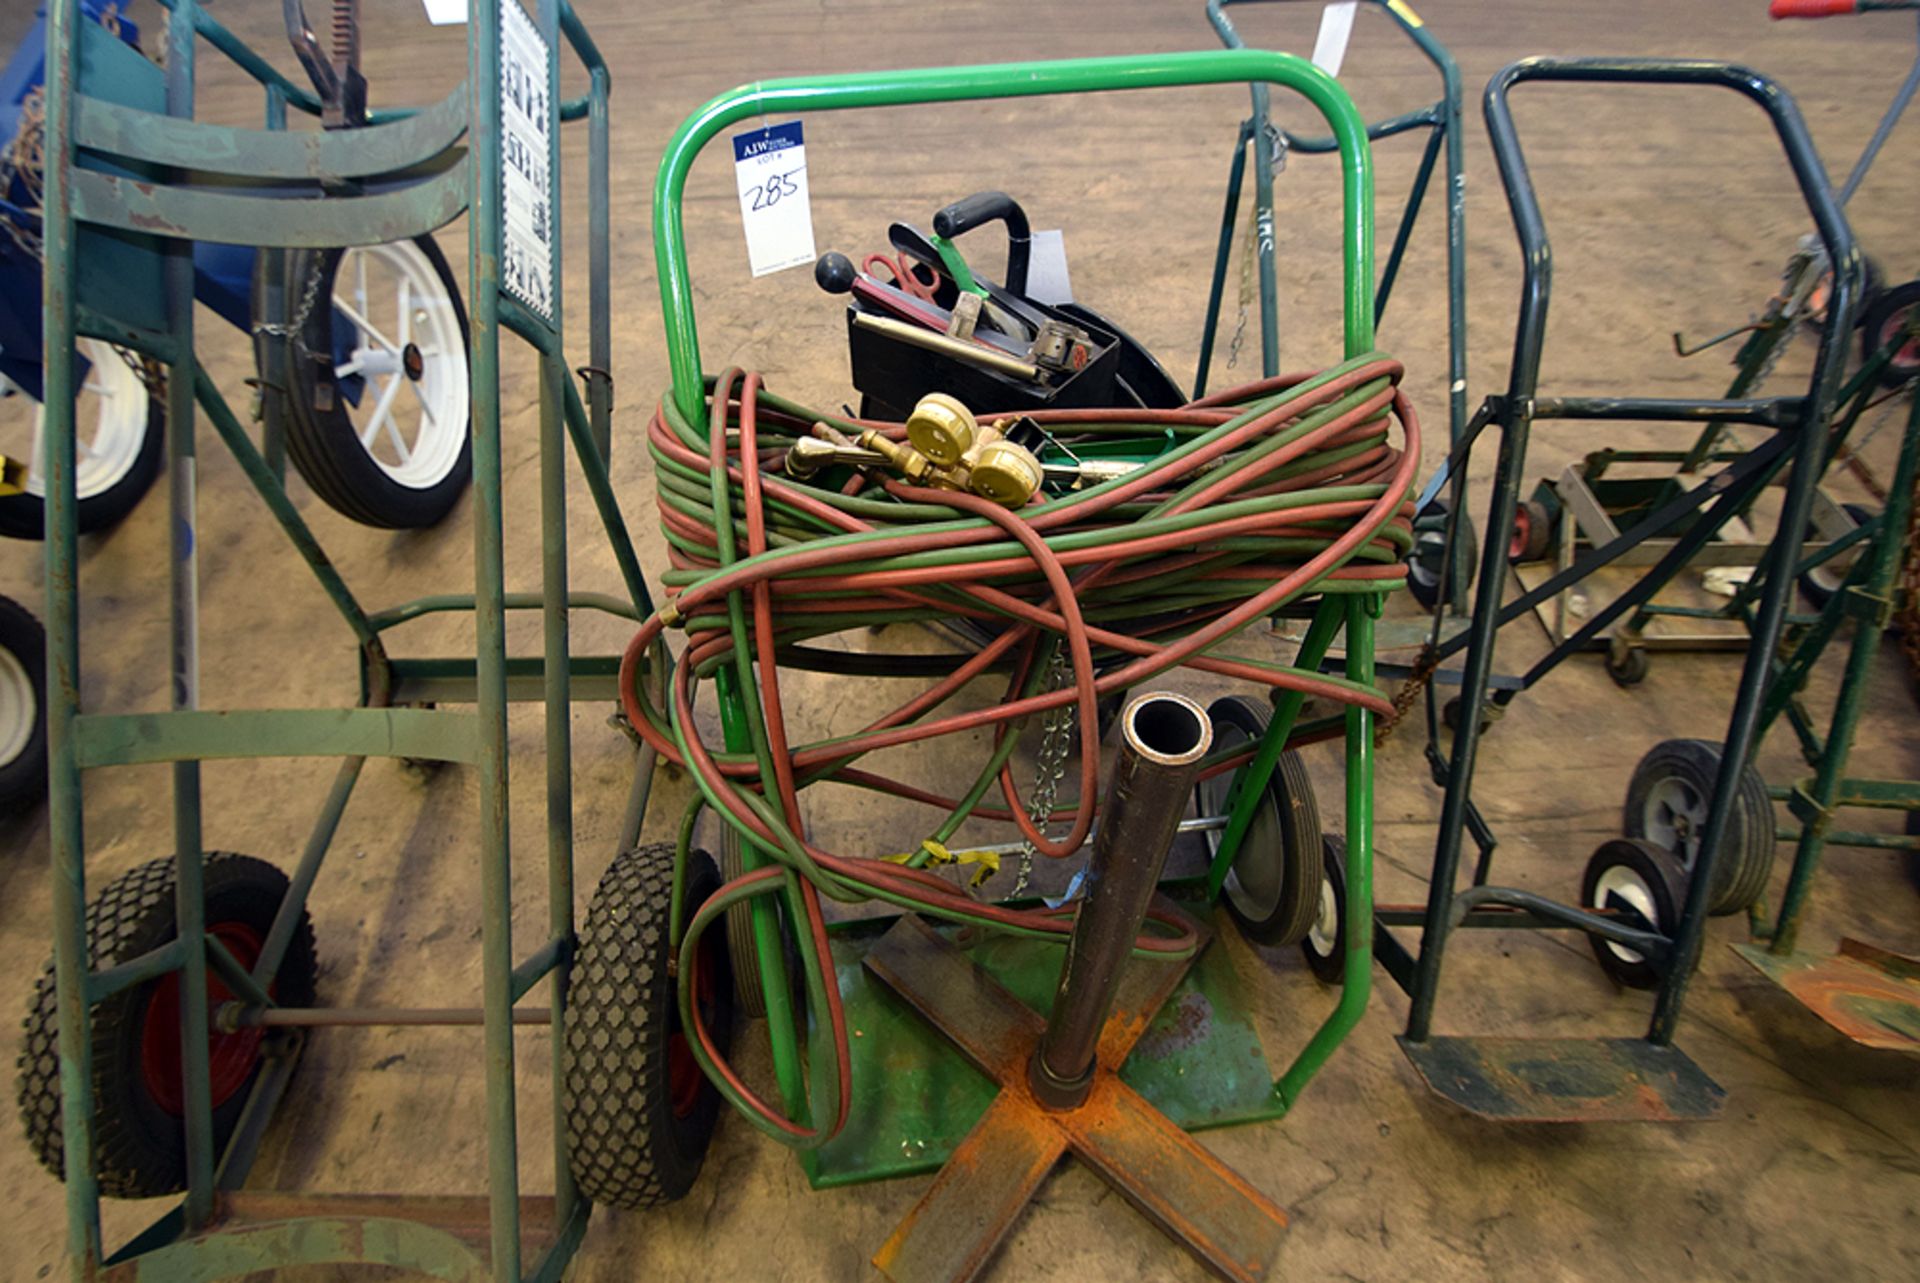 Acetylene Hose, Torch and Cart Set